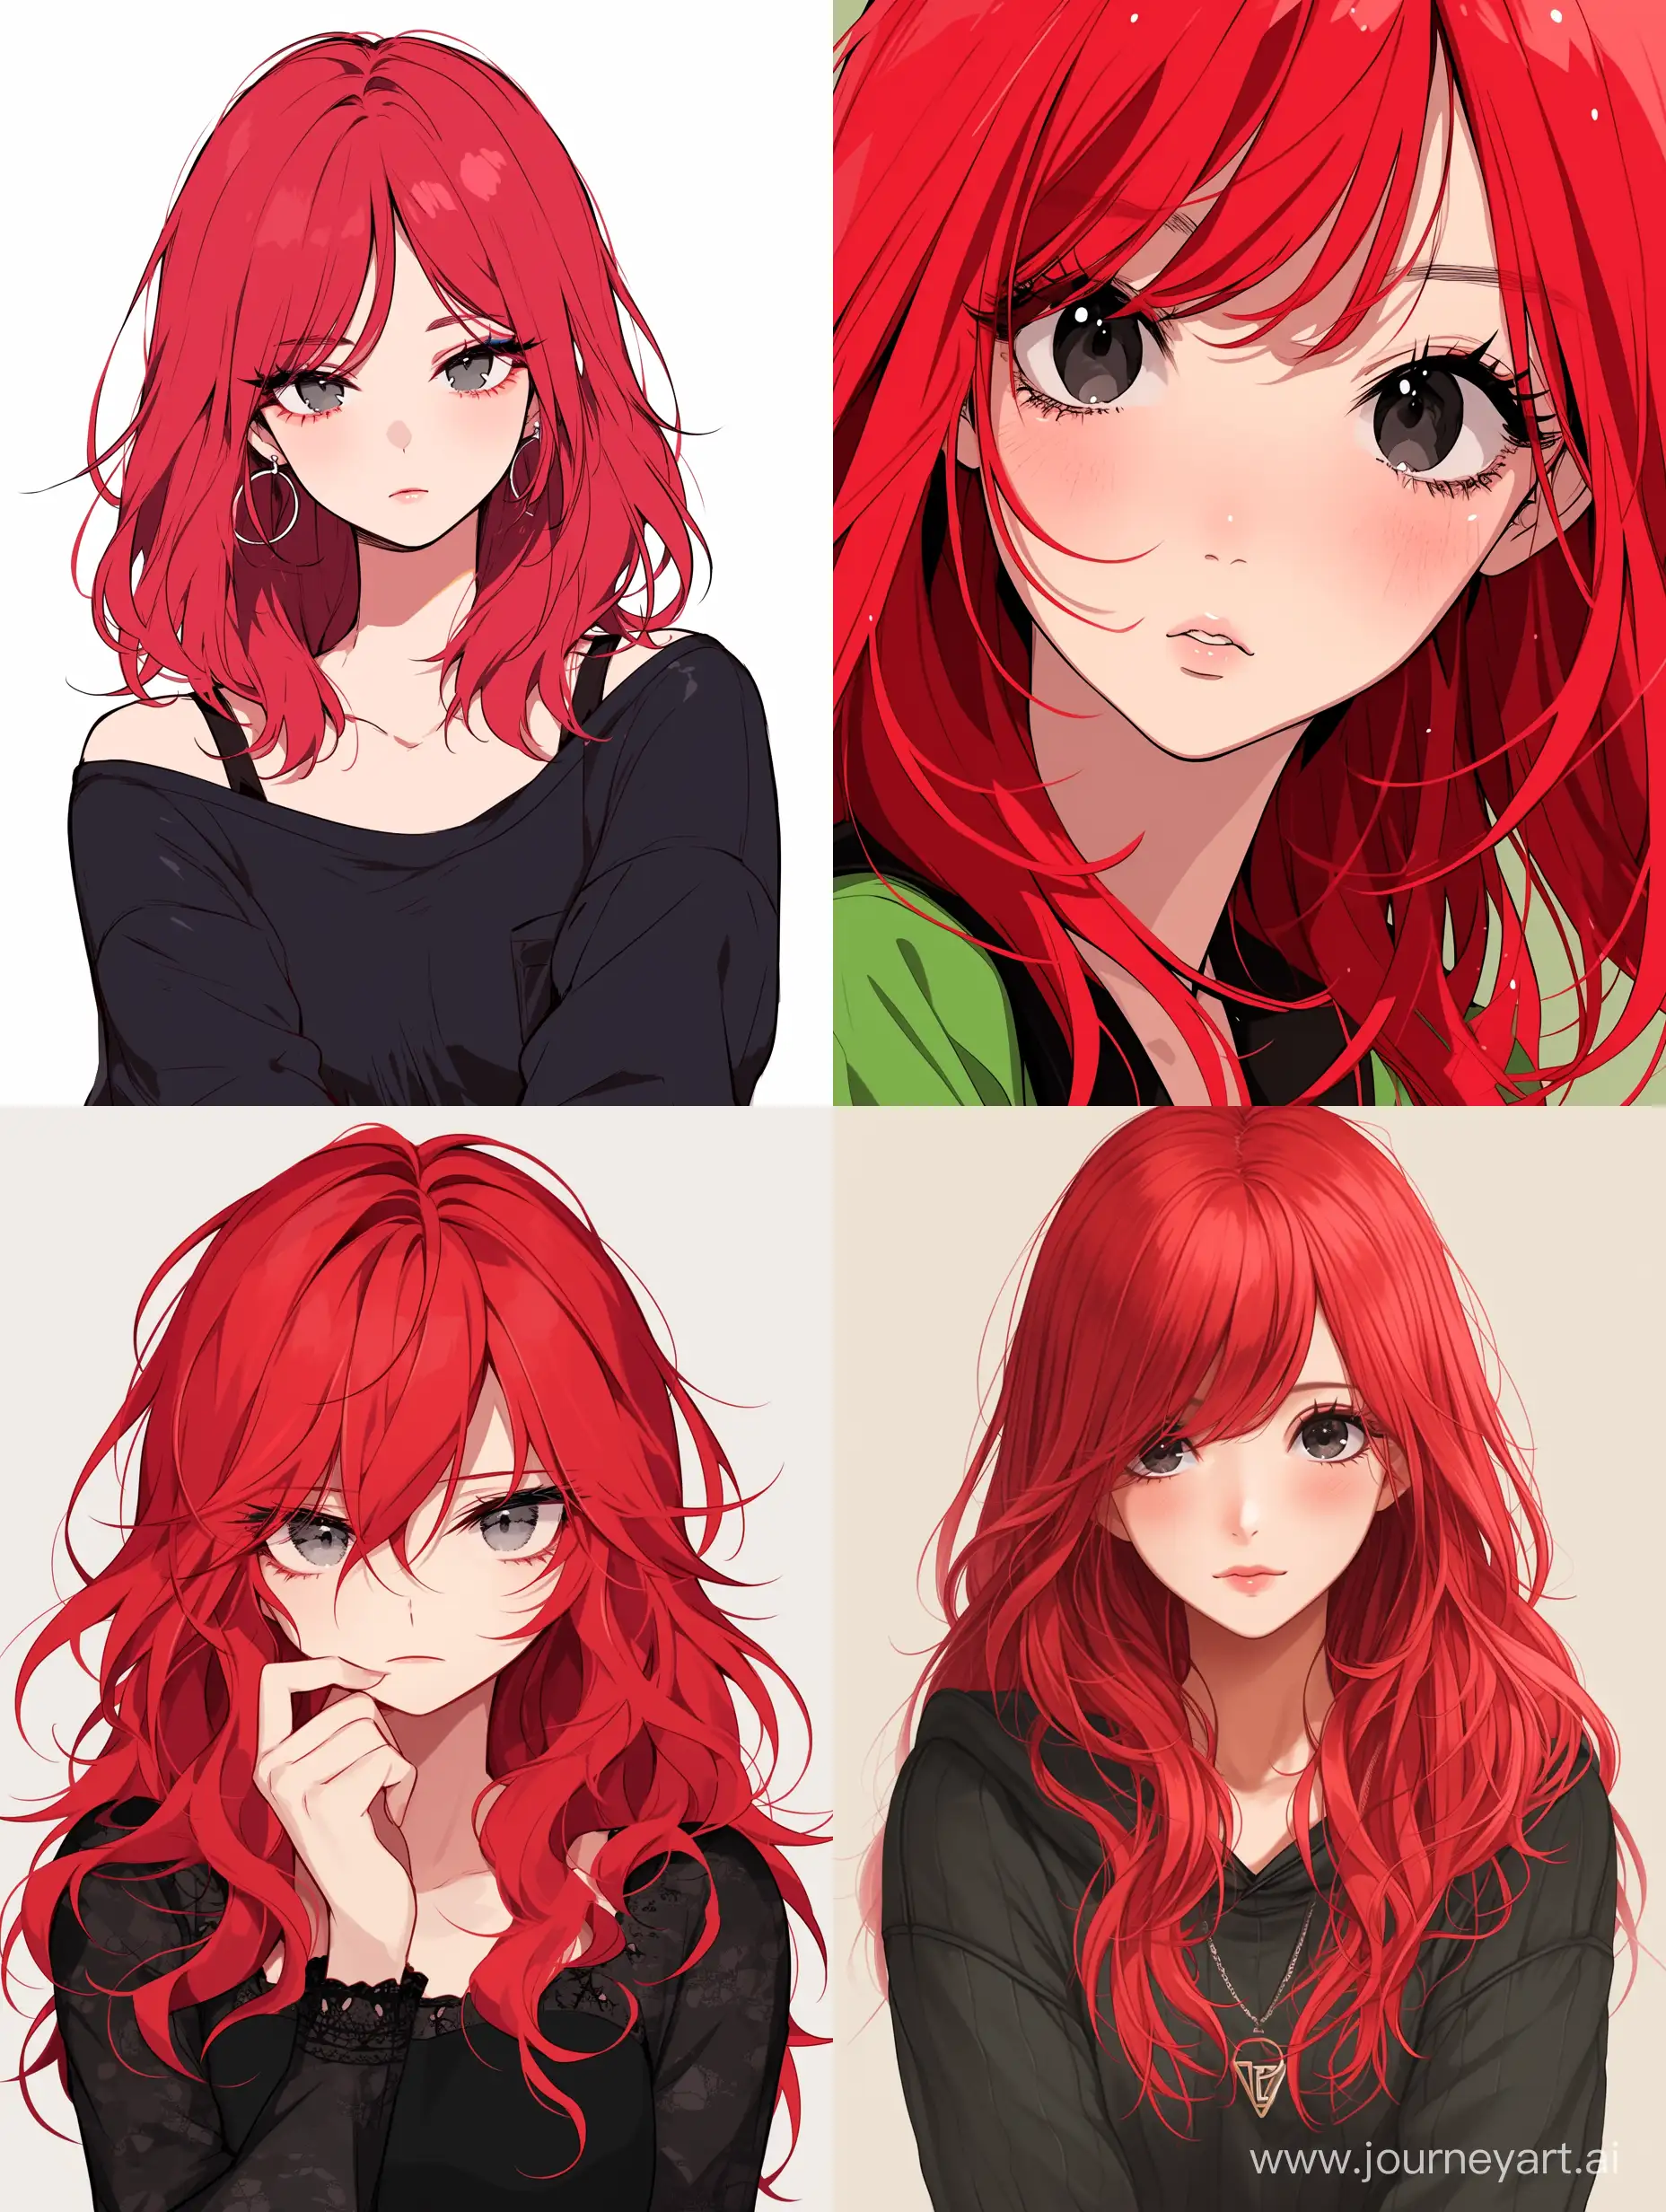 Anime-RedHaired-Girl-with-Mysterious-Black-Eyes